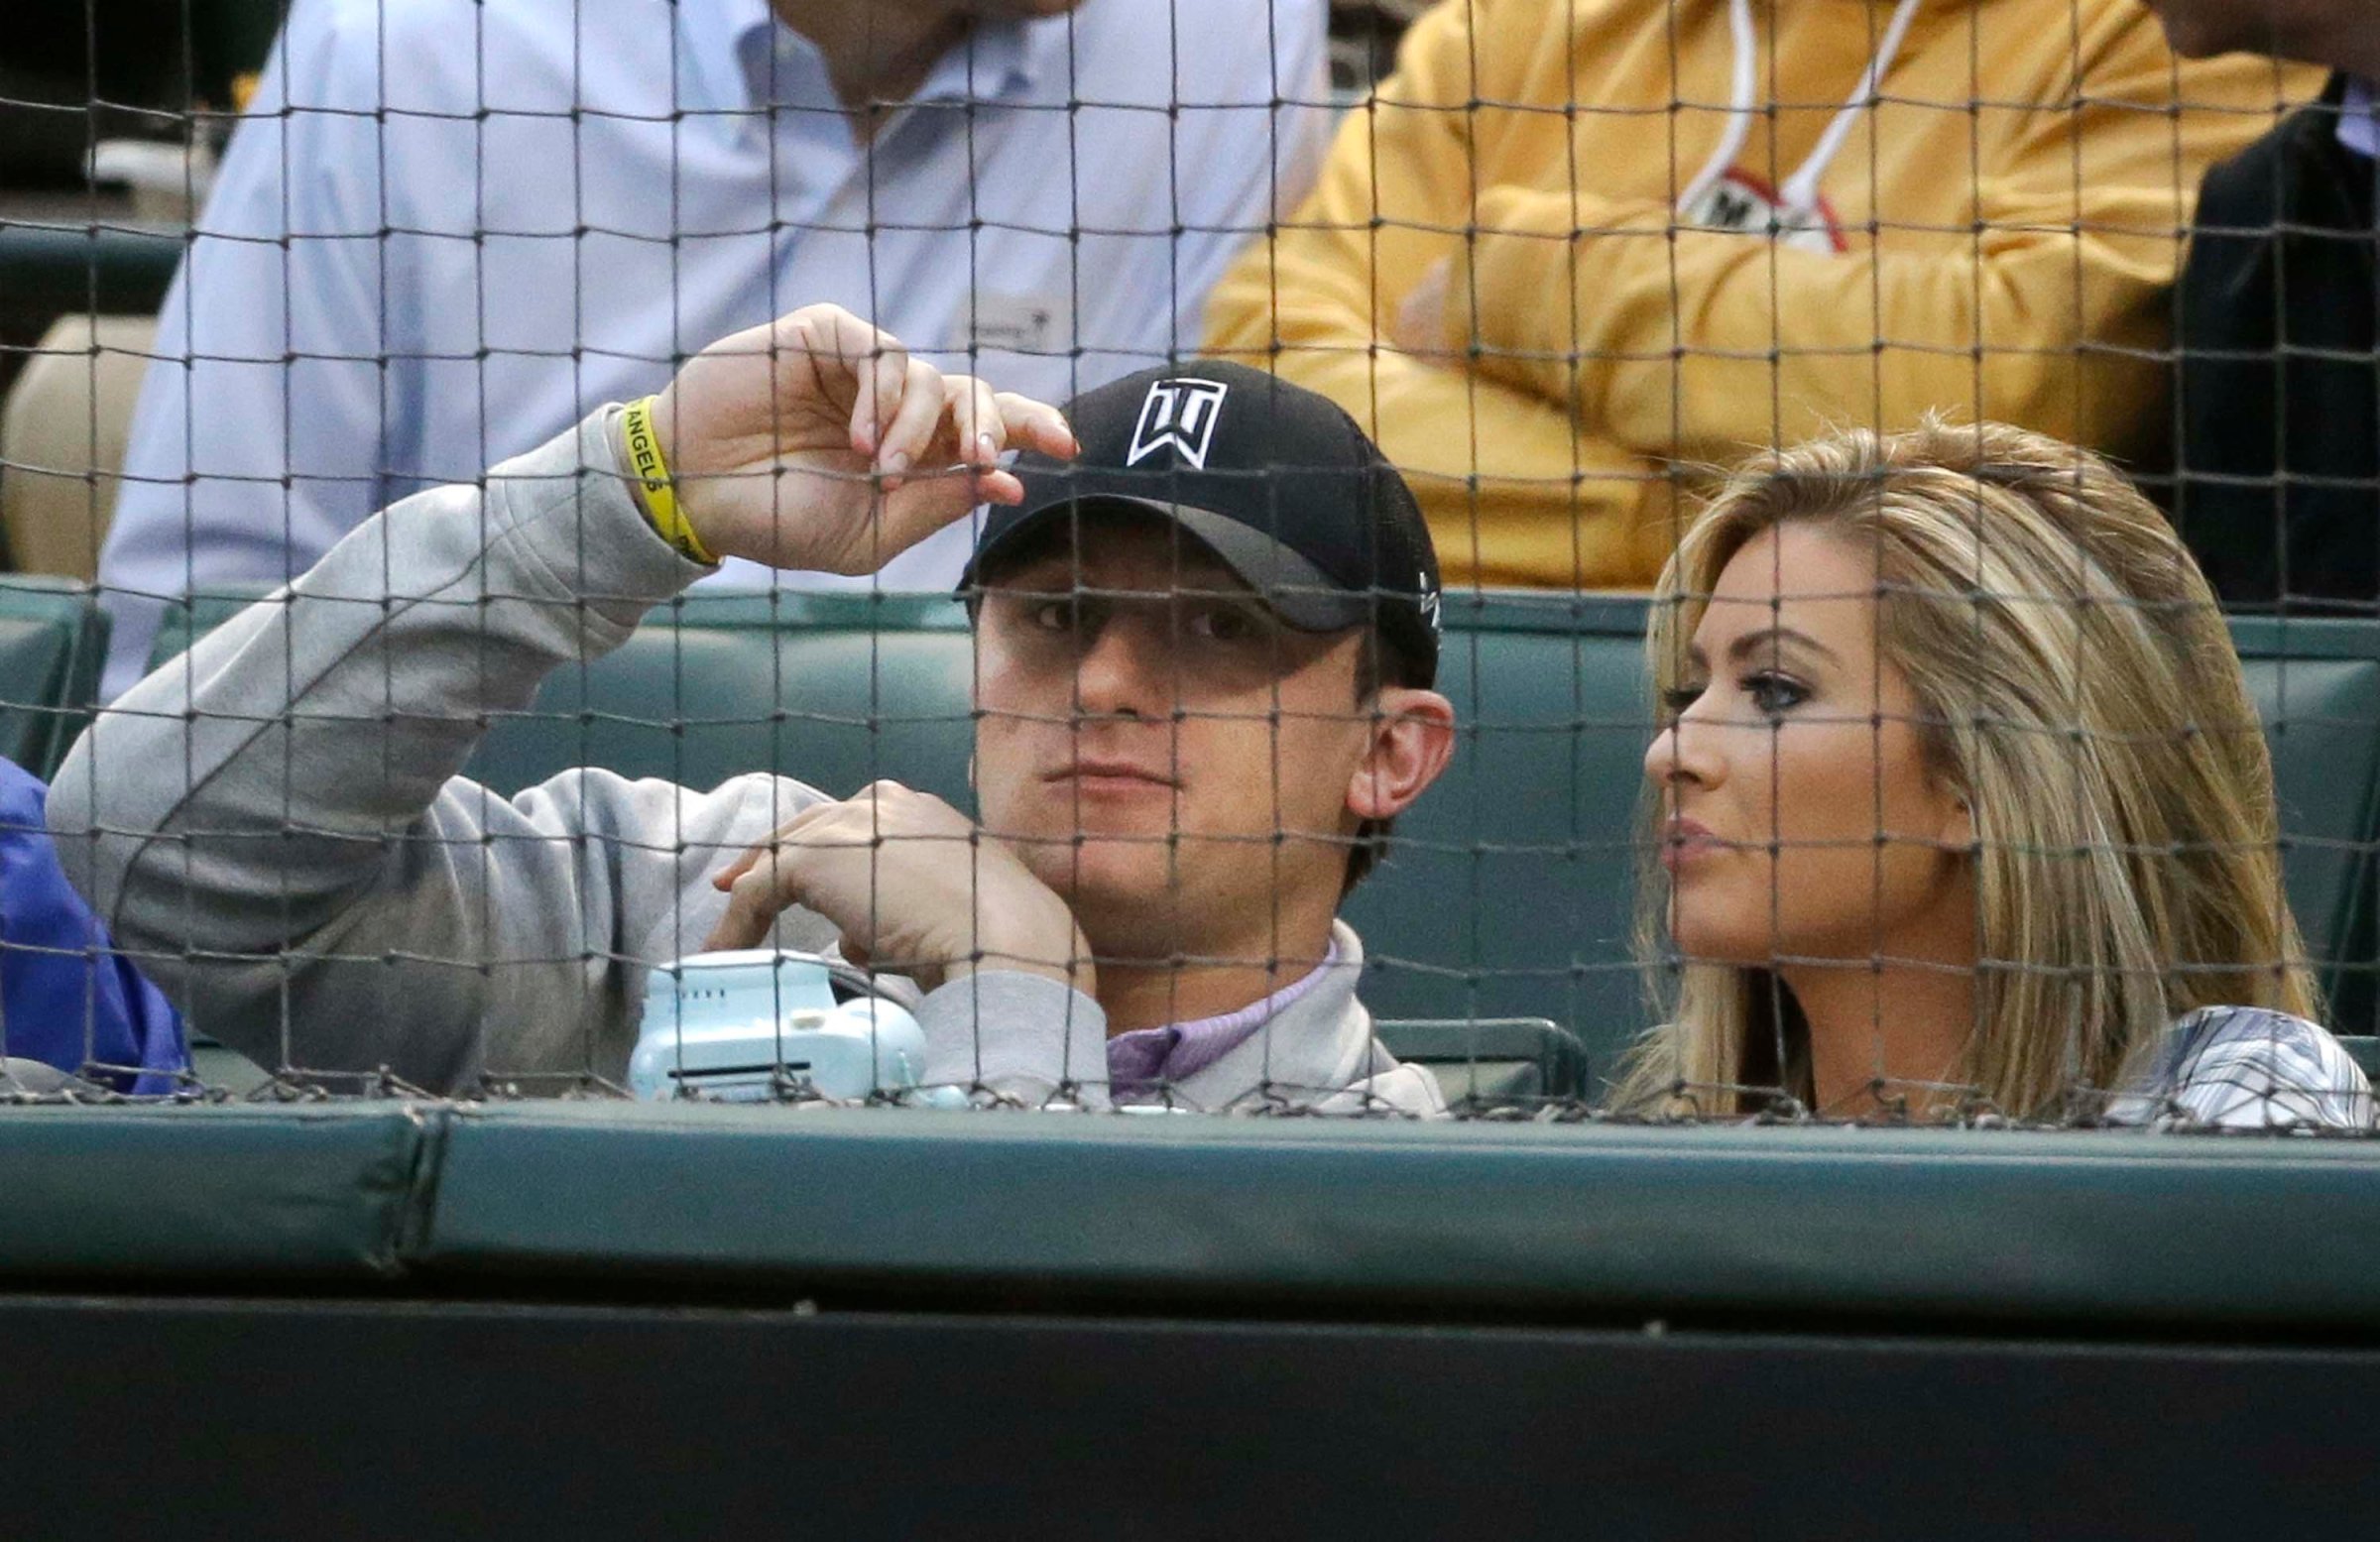 Johnny Manziel sits with Colleen Crowley during a baseball game between the Los Angeles Angels and the Texas Rangers in Arlington, Texas on April 14, 2015.